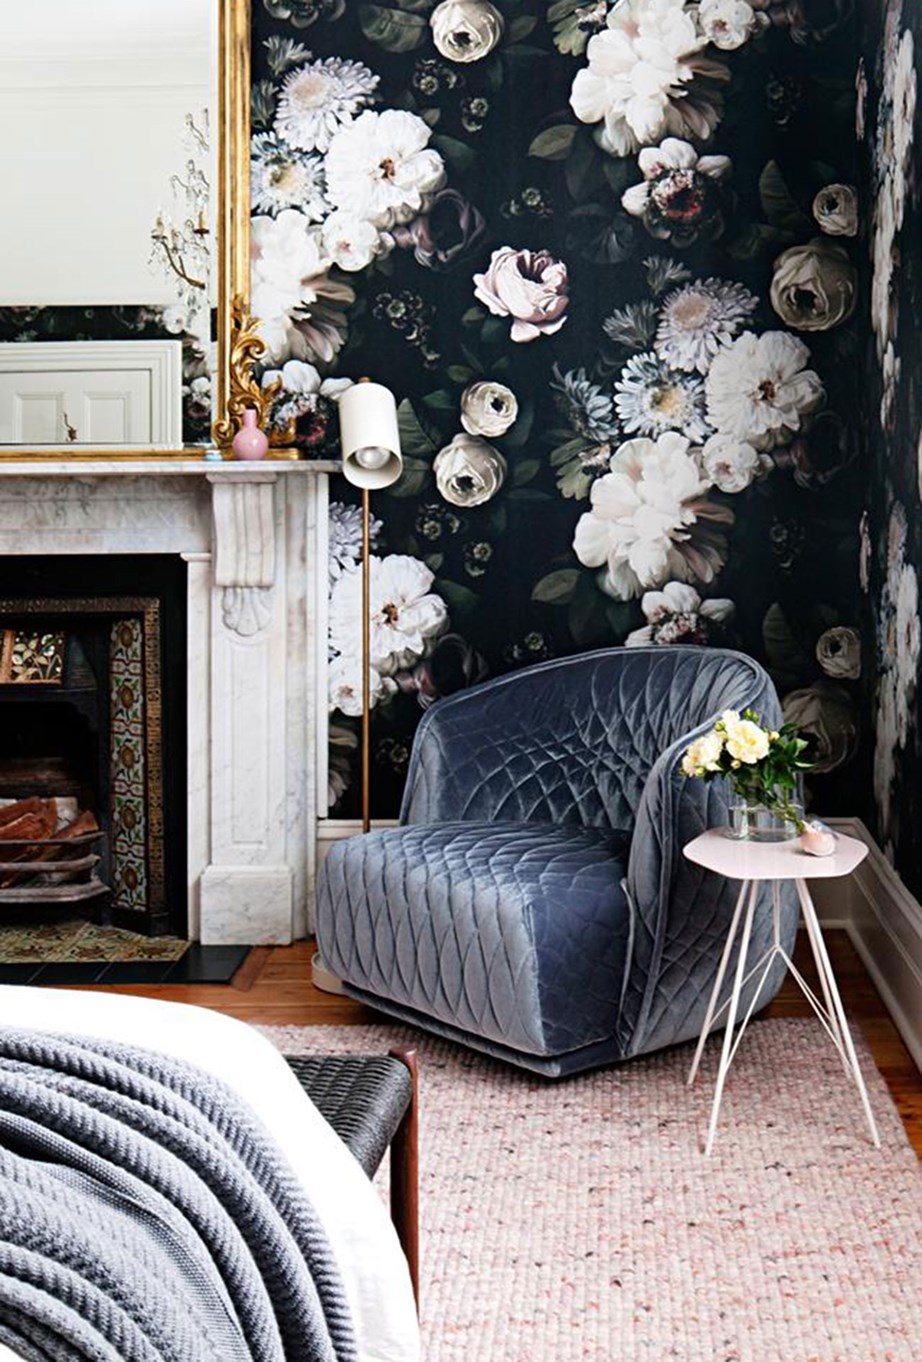 **Adorn your walls:** Gothic interiors call for patterned wallpapers or timber wainscoting, as well as early Victorian-era dado rails or picture rails. If you don't want to commit to completely [dark walls](https://www.homestolove.com.au/dark-wall-ideas-18639|target="_blank"), consider painting up to a dado rail or wallpapering a feature wall only. Floral or damask wallpaper is ideal.